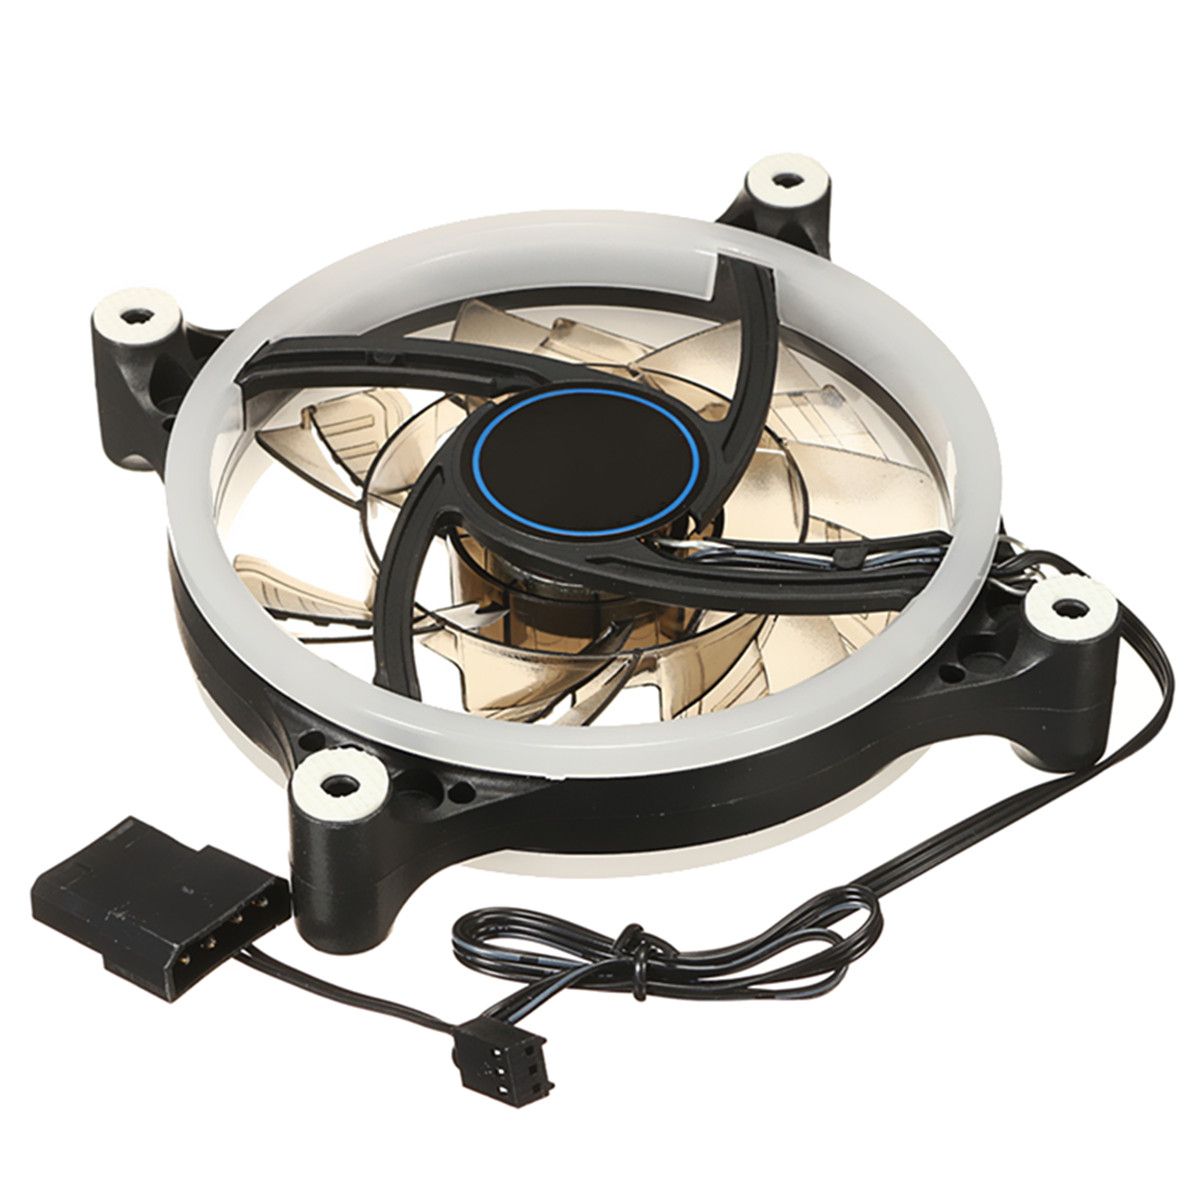 Replacement-118cm-3pin-4pin-LED-Computer-Cooling-Fan-1200-1500rpm-for-Bitcoin-Mining-PC-Case-1258209